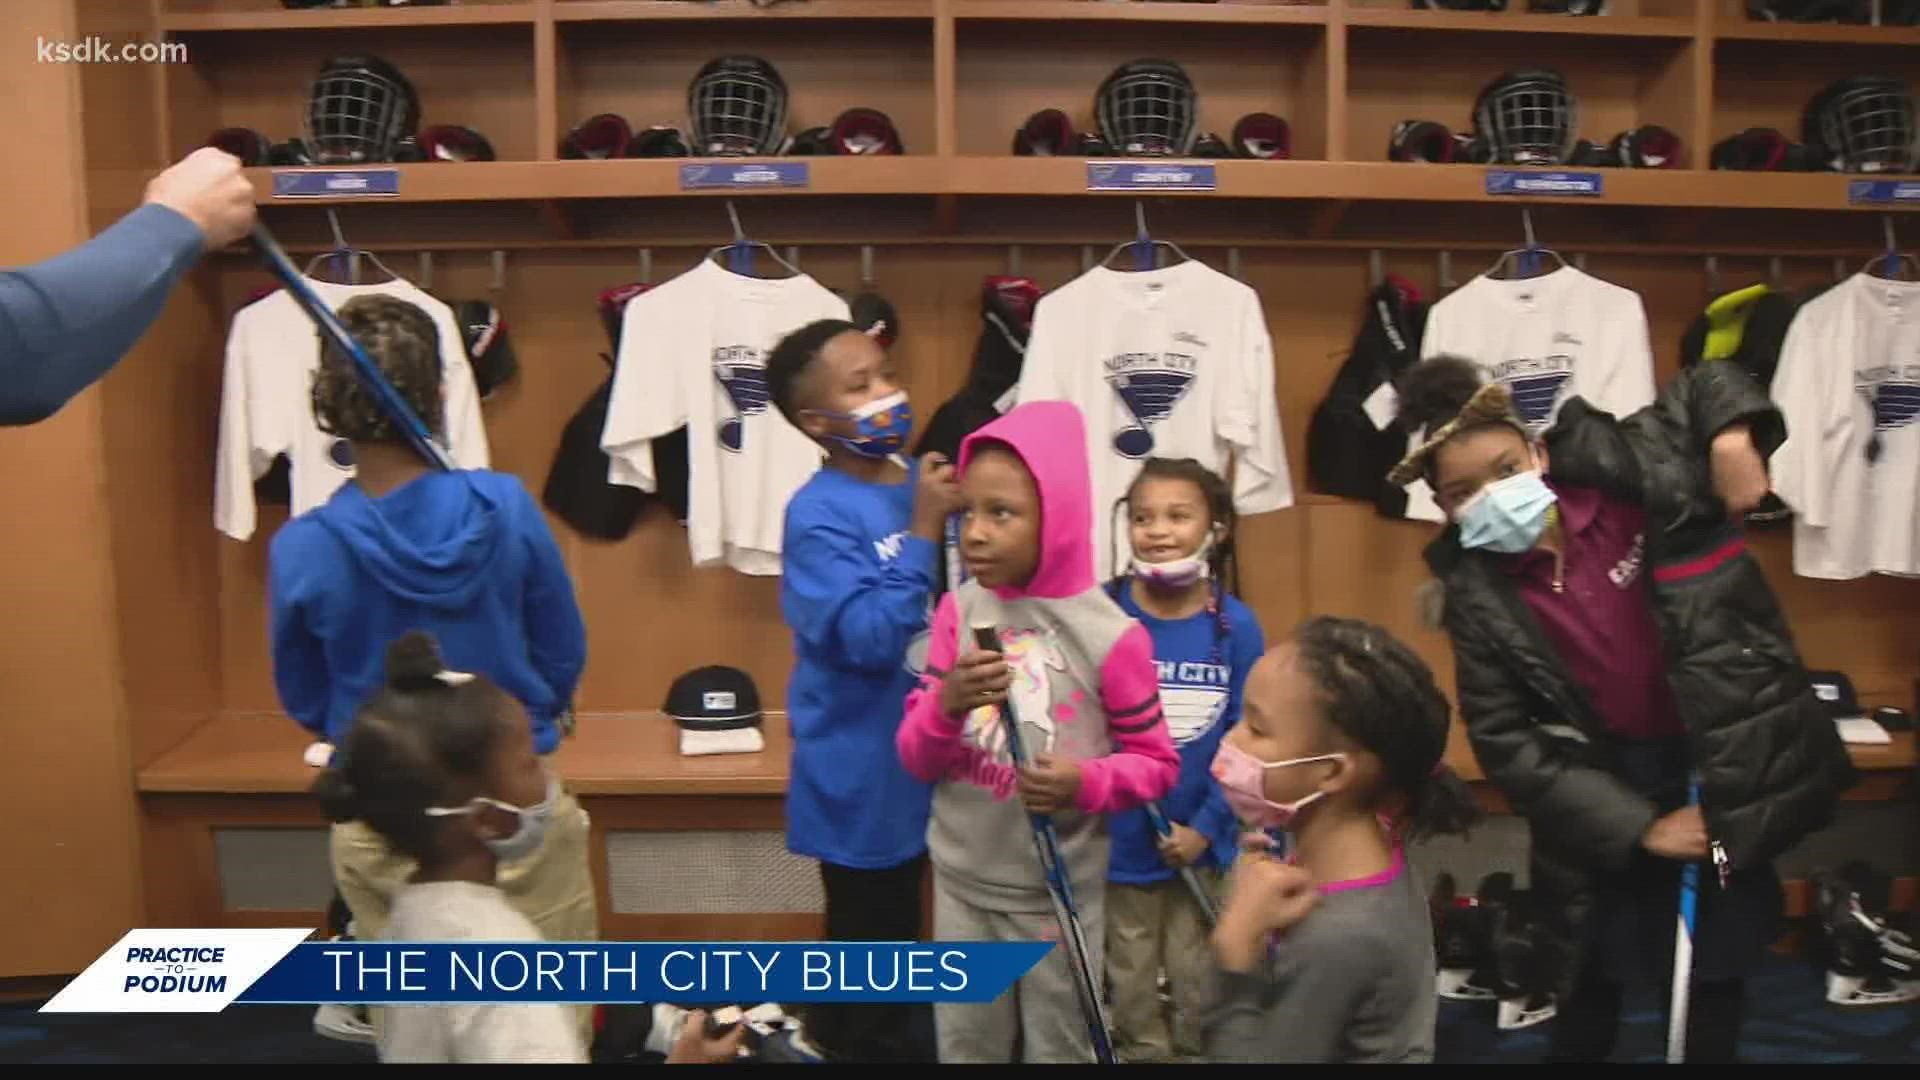 The North City Blues had 26 kids sign up this year. They're hoping to get to more than 1,000.